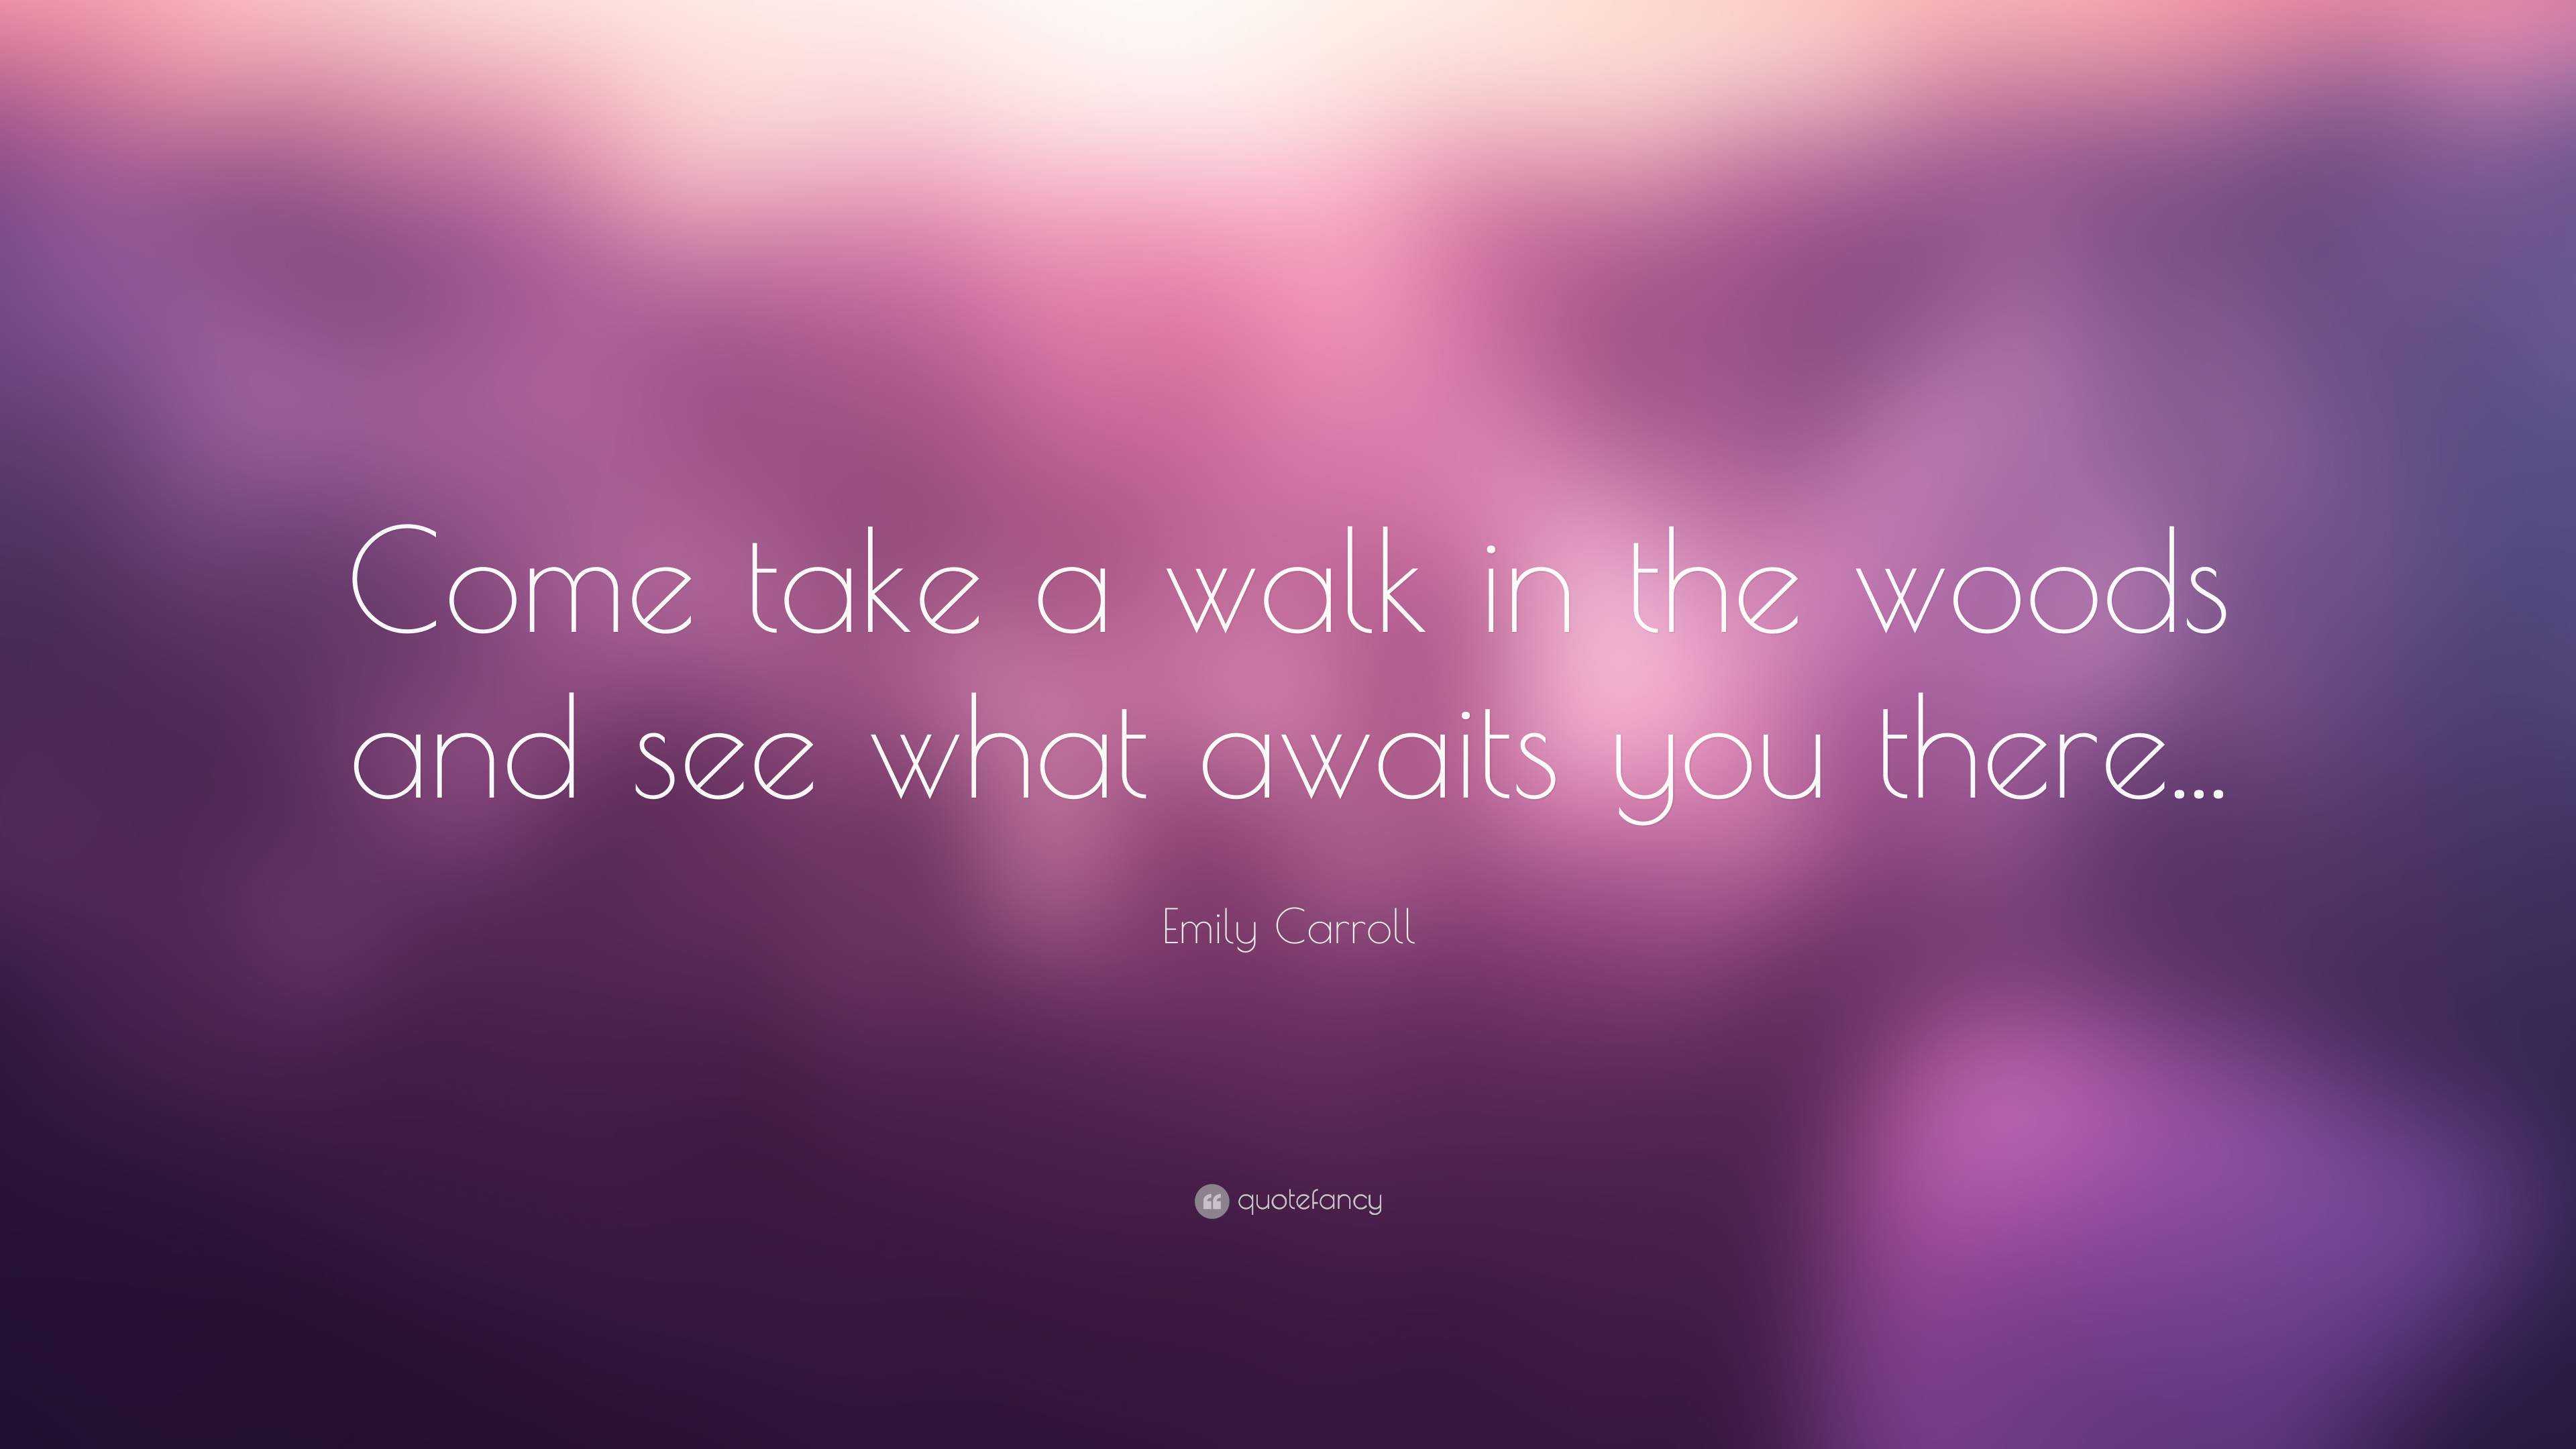 Emily Carroll Quote “come Take A Walk In The Woods And See What Awaits You There ”